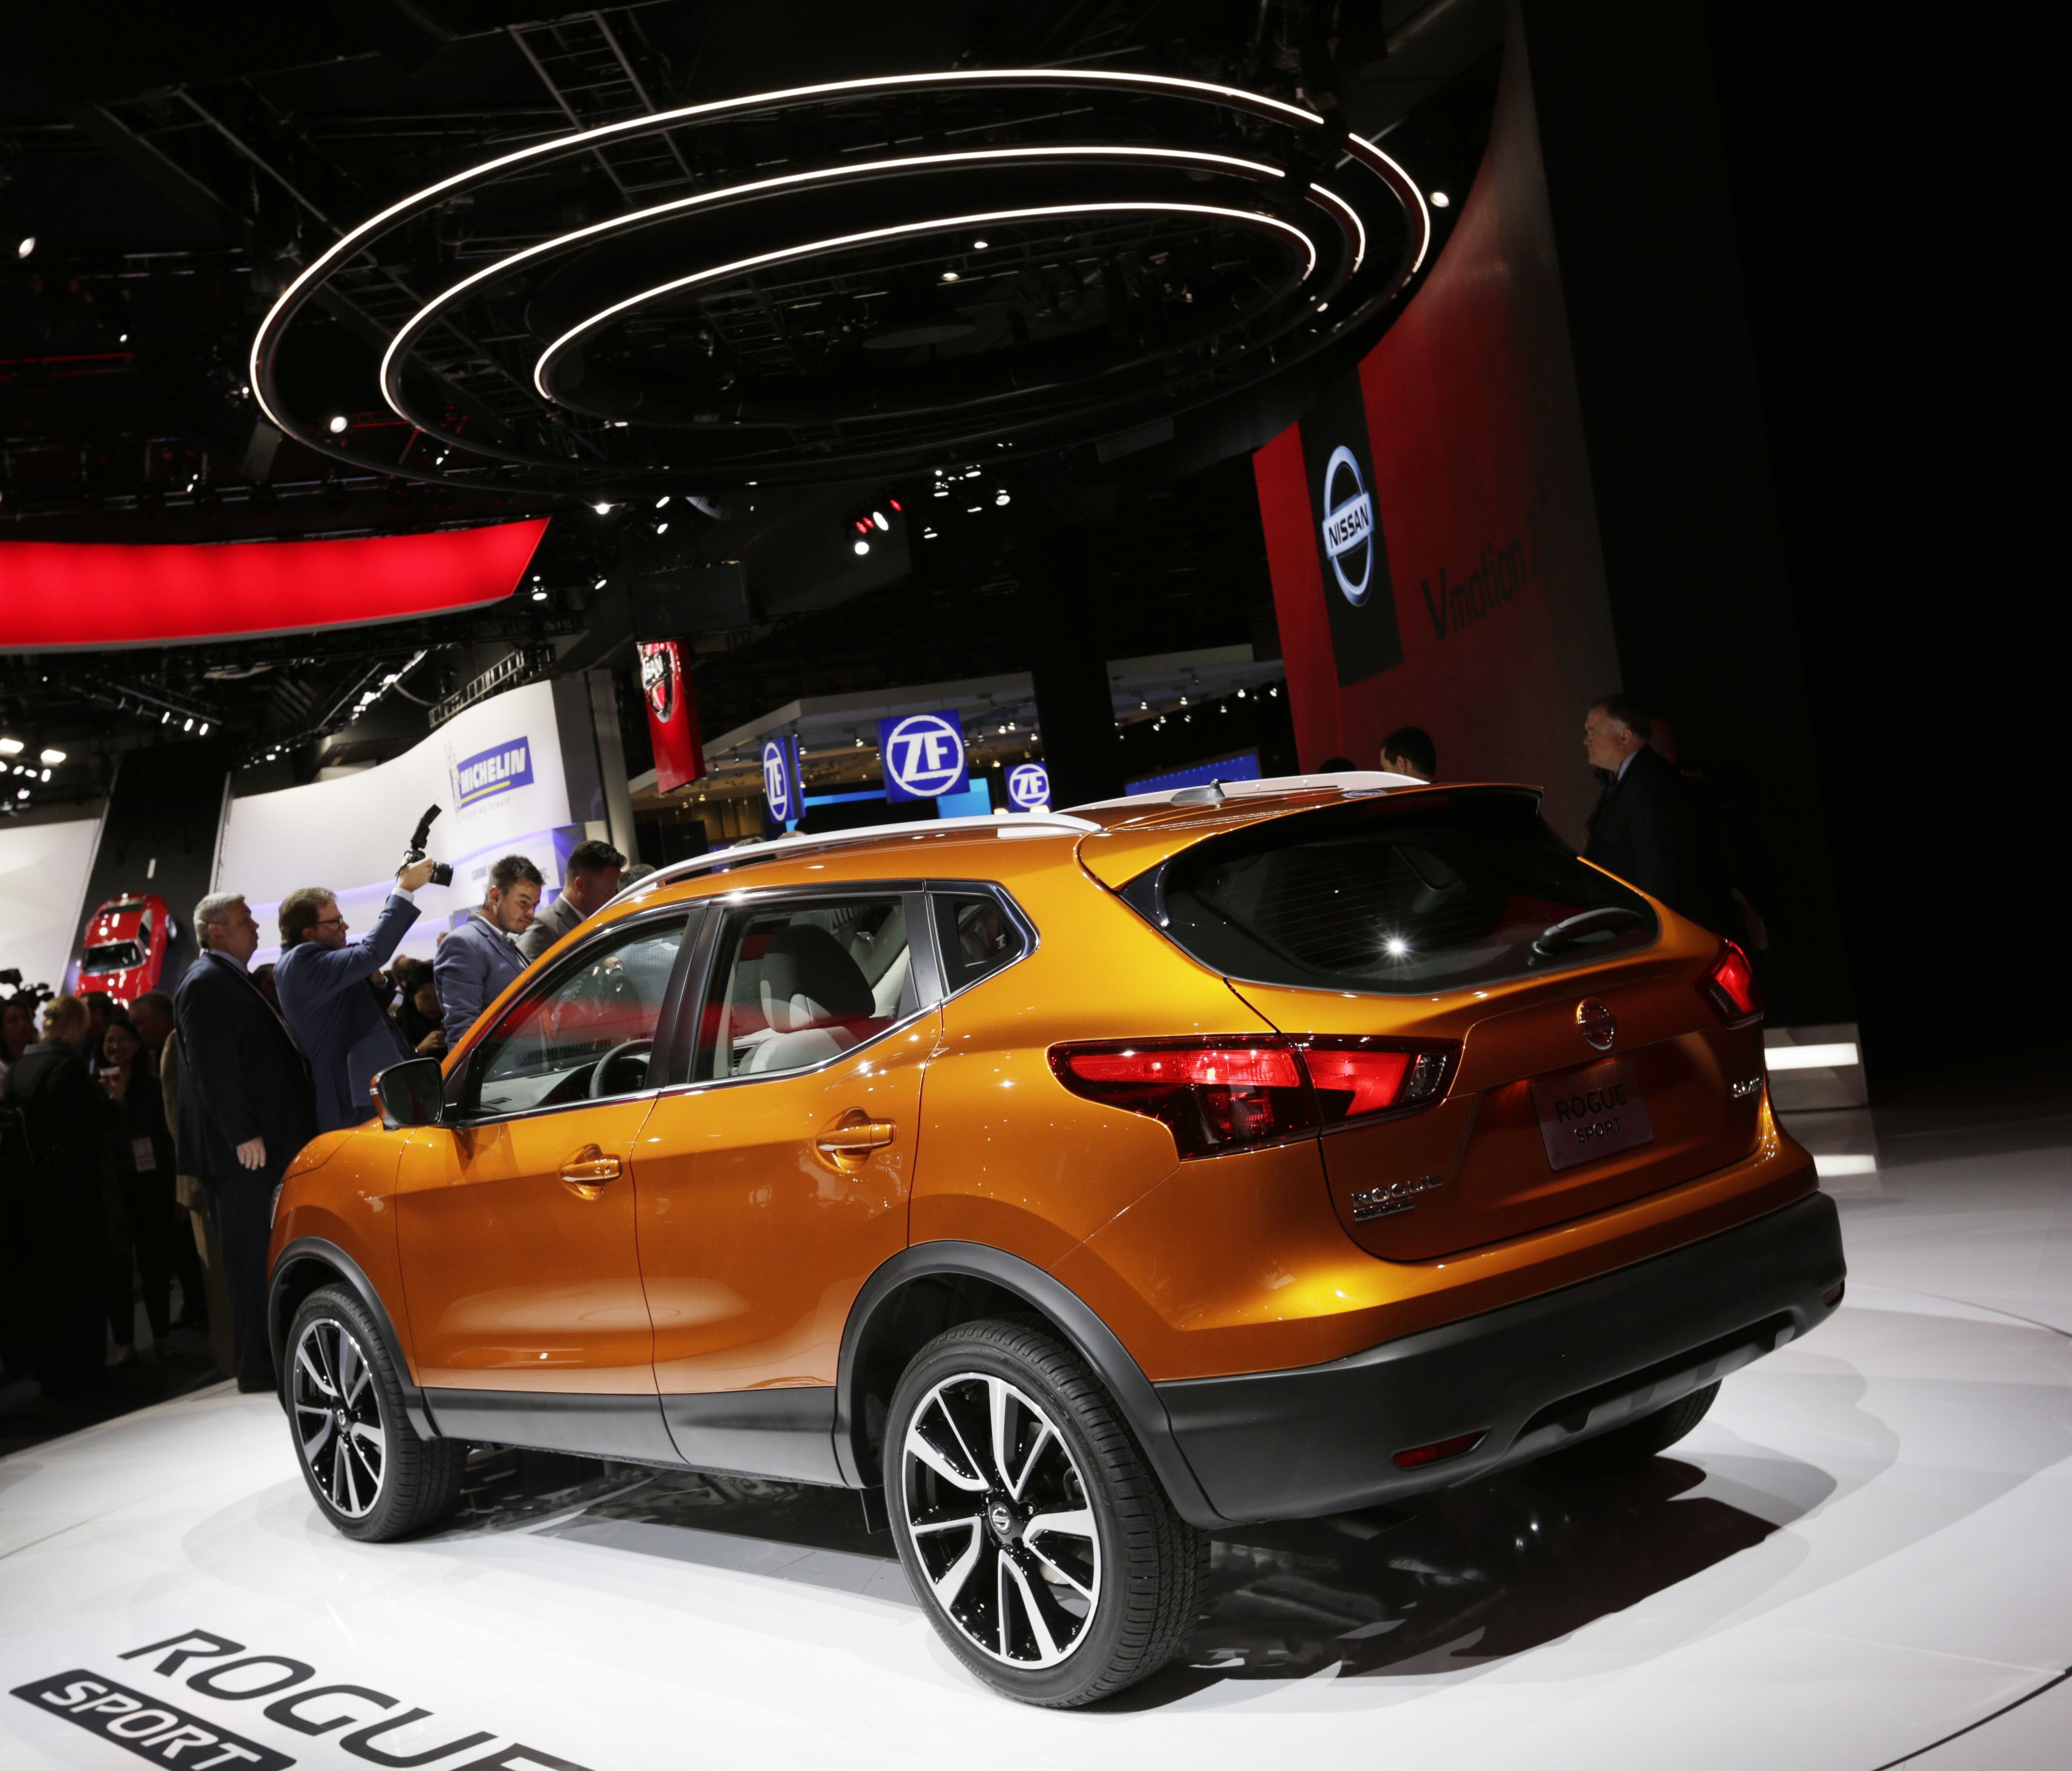 Nissan revealed the Rogue Sport during the 2017 North American International Auto Show at Cobo Center in Detroit in January. It is one of seven models getting automatic emergency braking